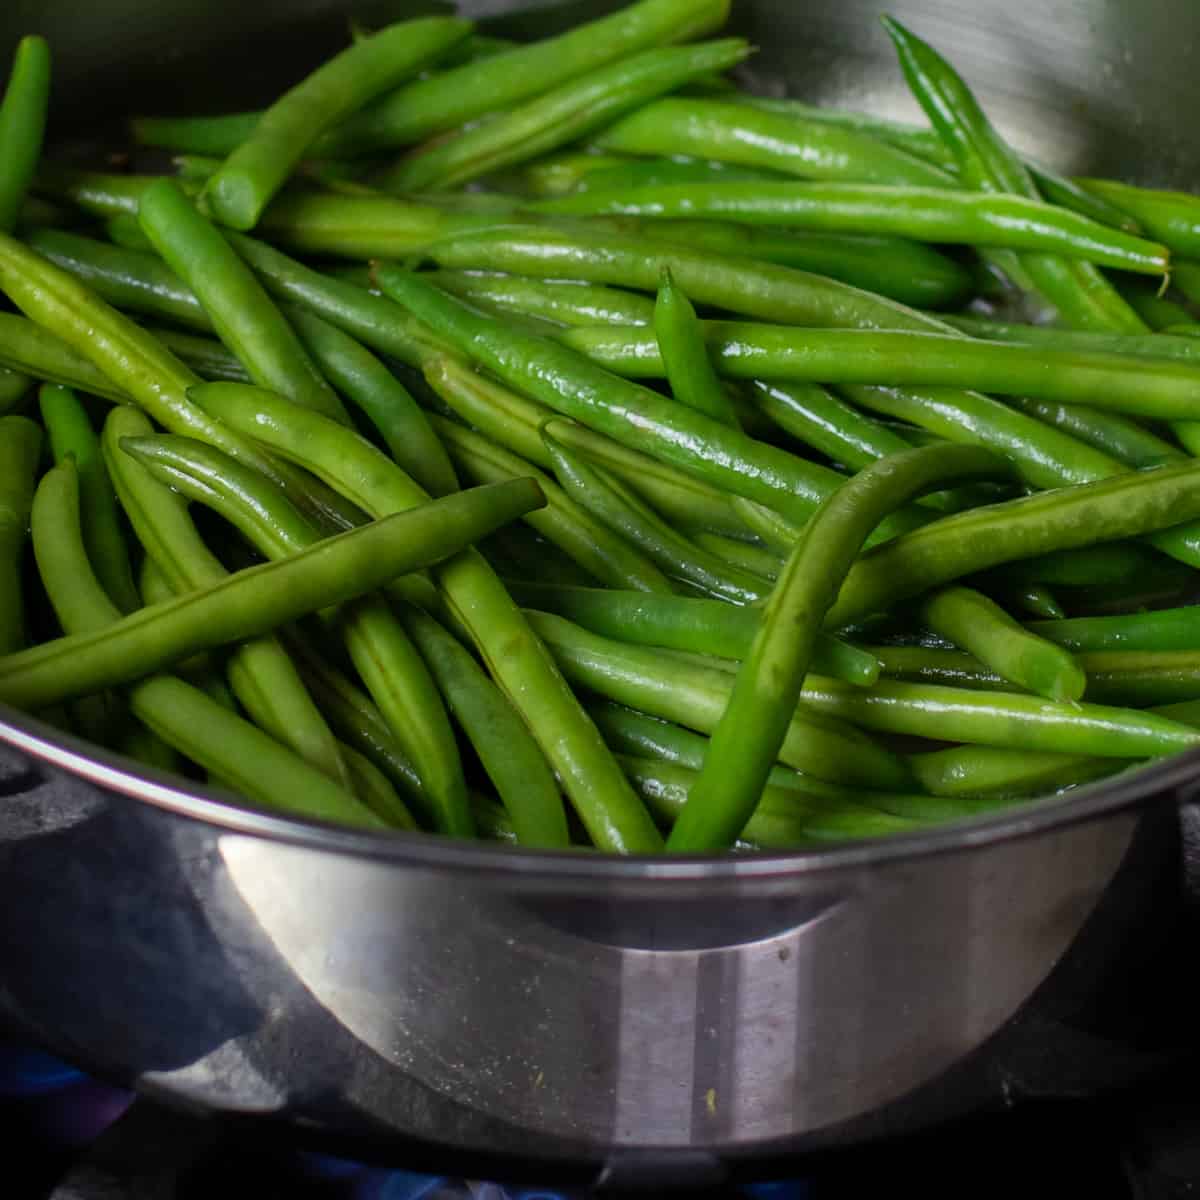 Raw green beans in a frying pan.